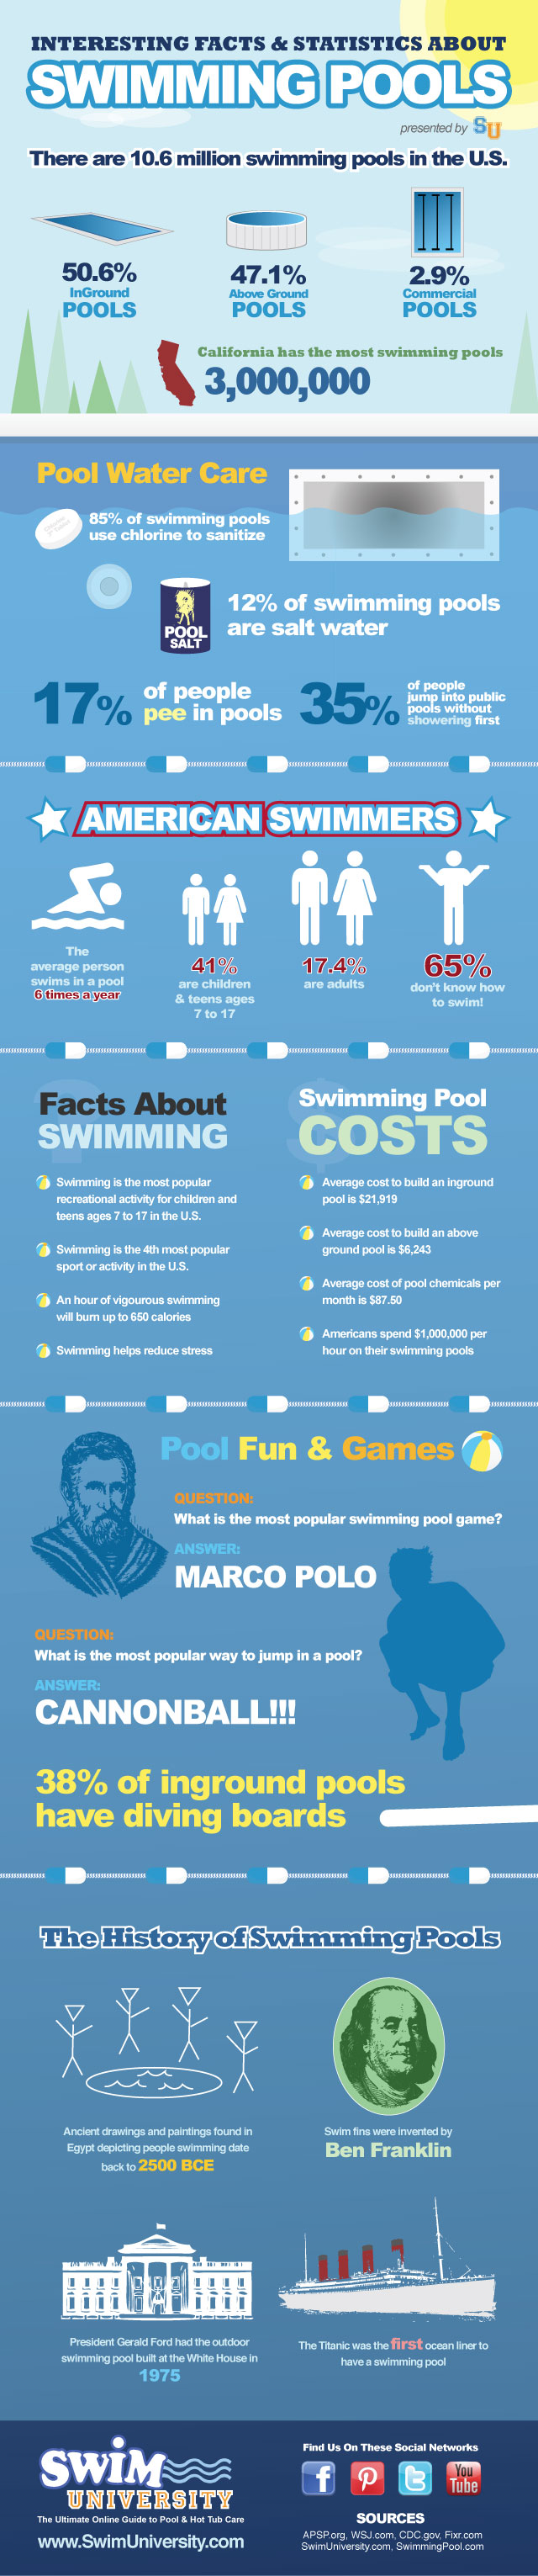 Interesting Facts About Swimming Pools